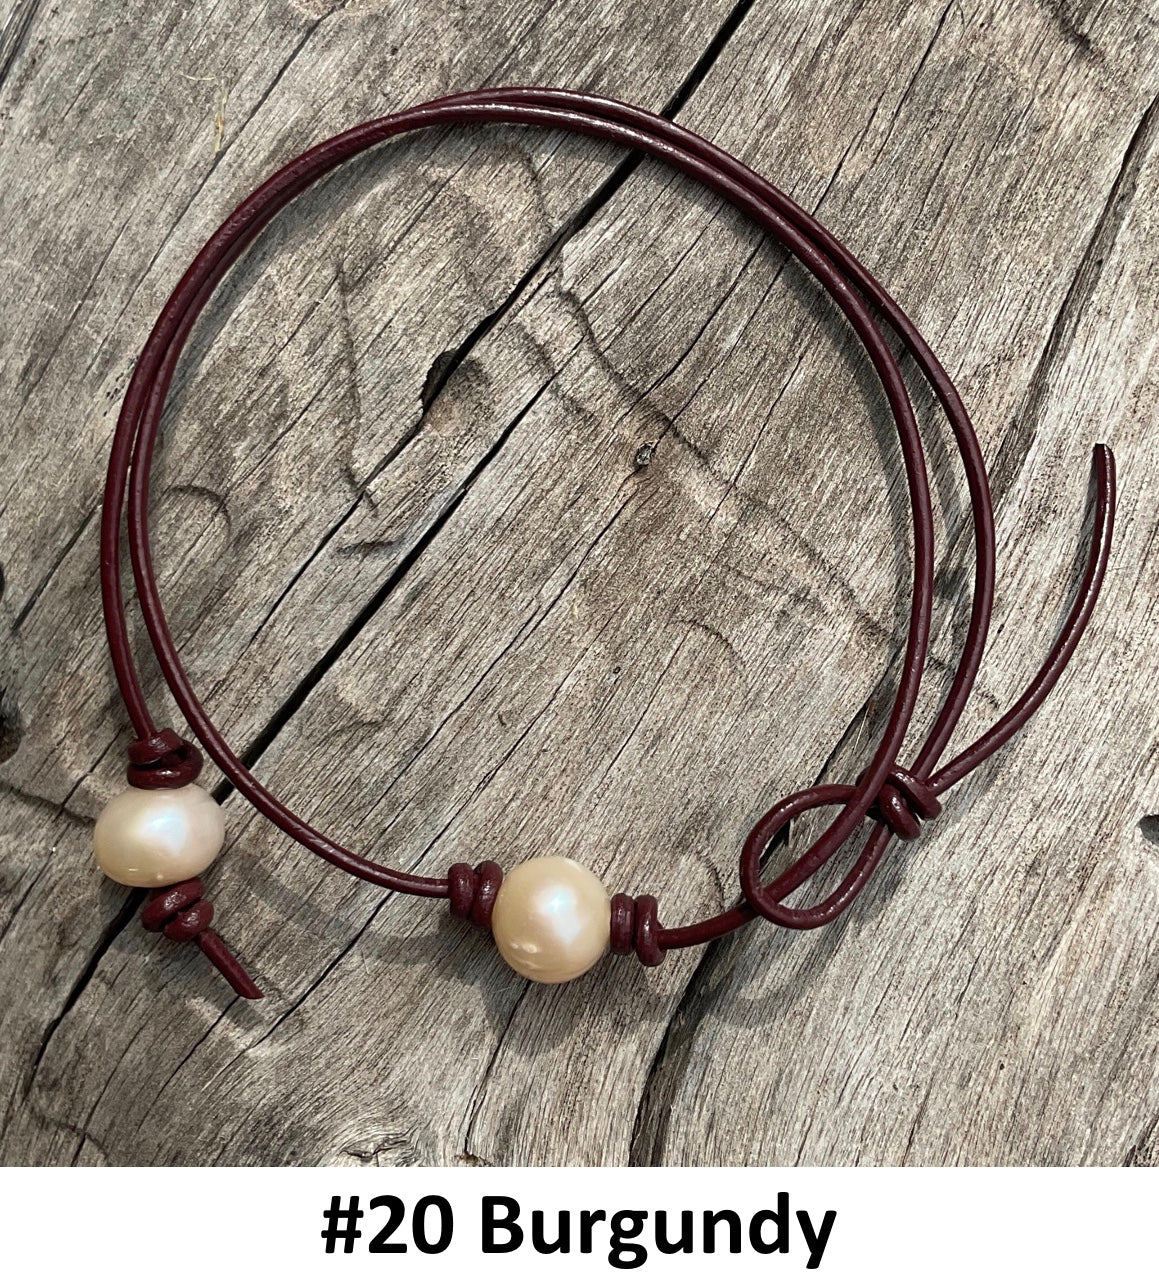 Single Pink Pearl Necklace, #20 Burgundy Leather Cord